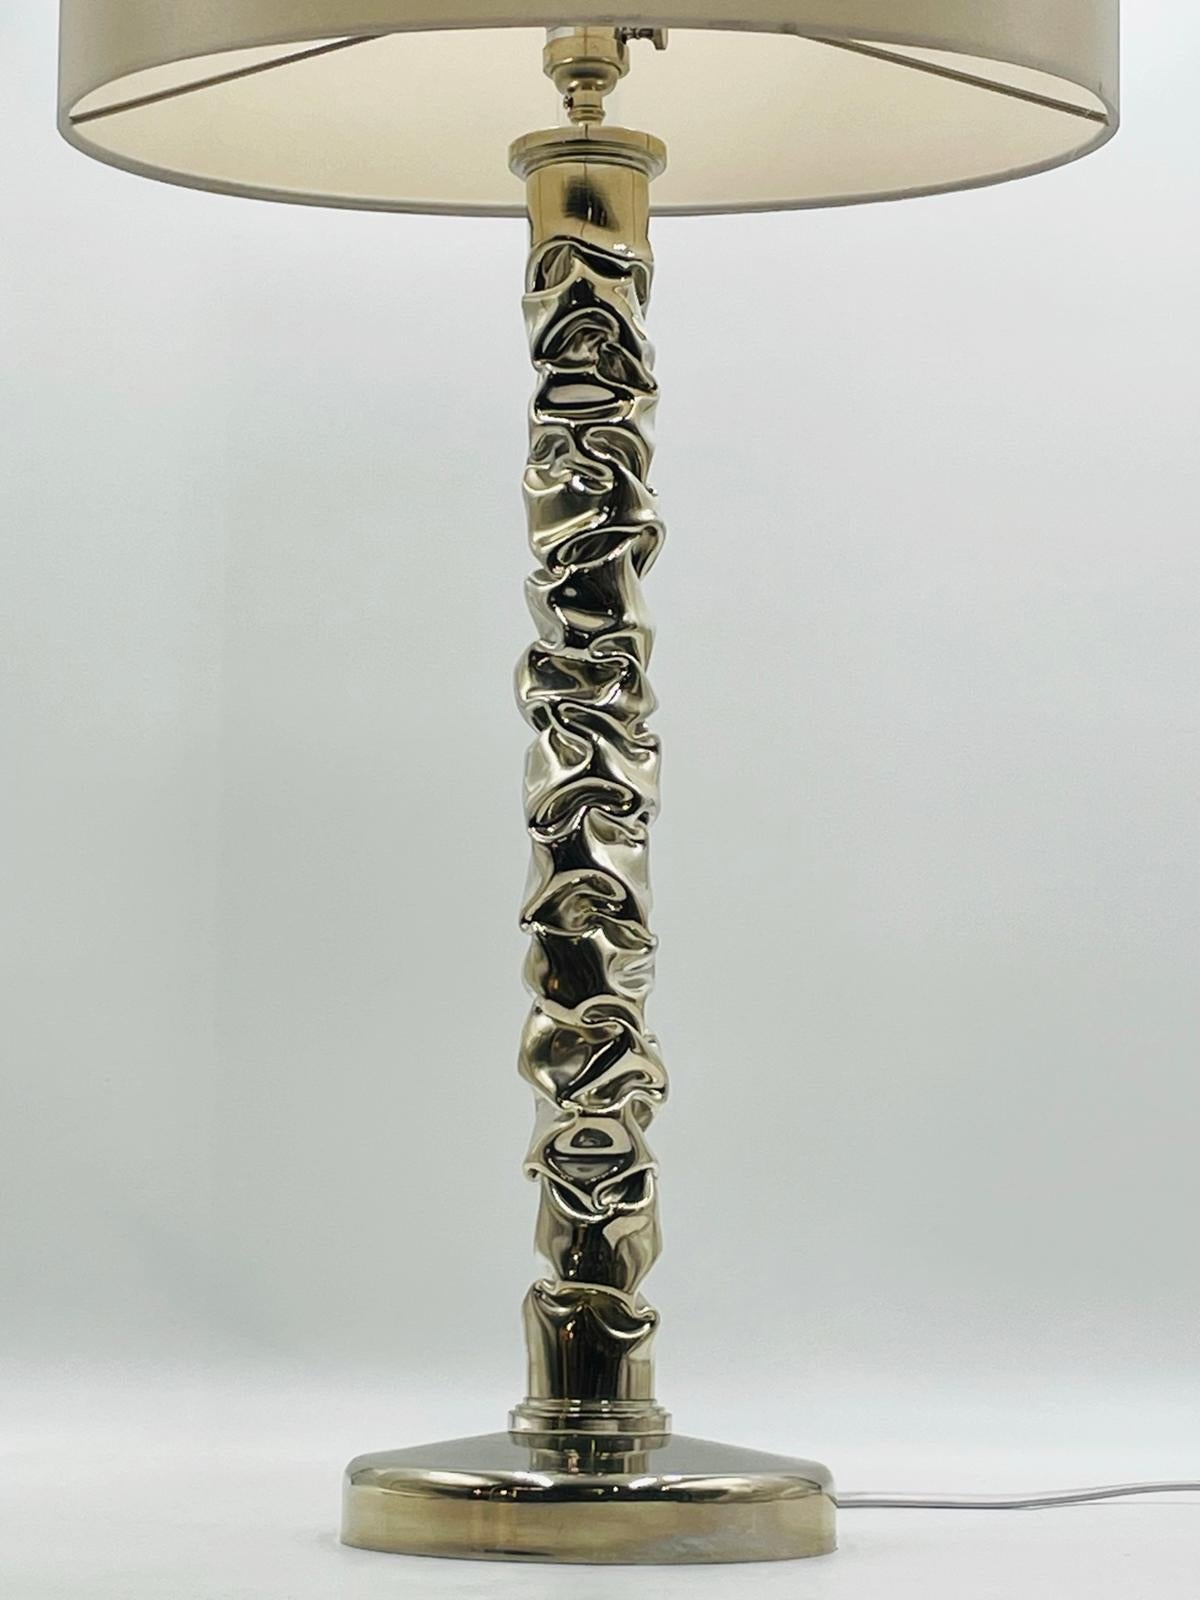 English Stunning Table Lamp in Polished Nickel, Made in England by Porta Romana For Sale